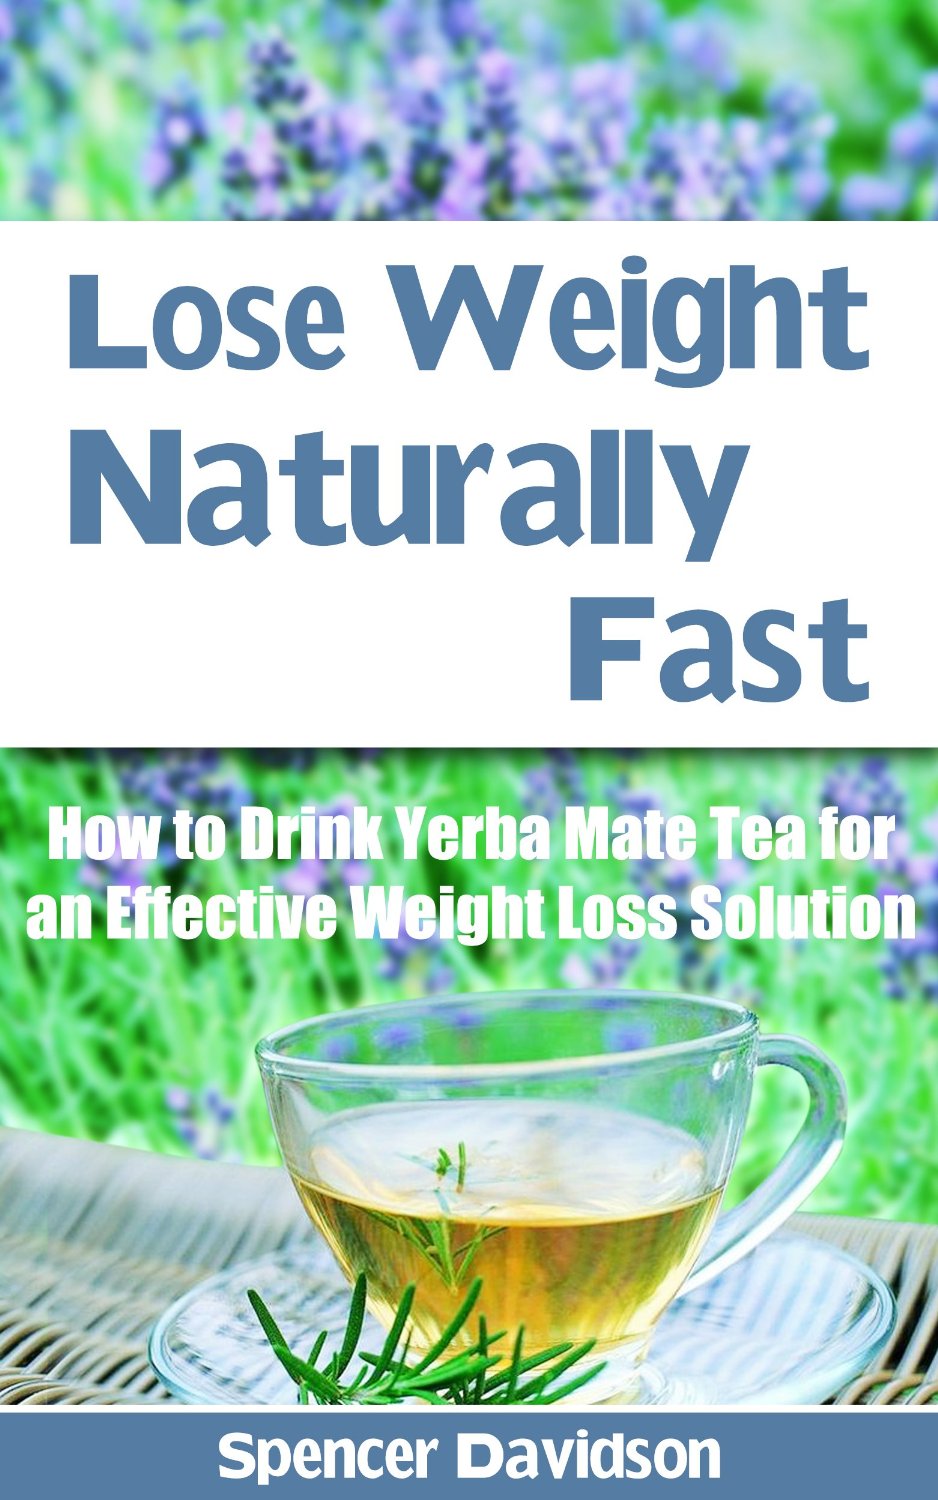 Lose Weight Naturally Fast:How to Drink Yerba Mate Tea for an Effective Weight Loss Solution by Spencer Davidson